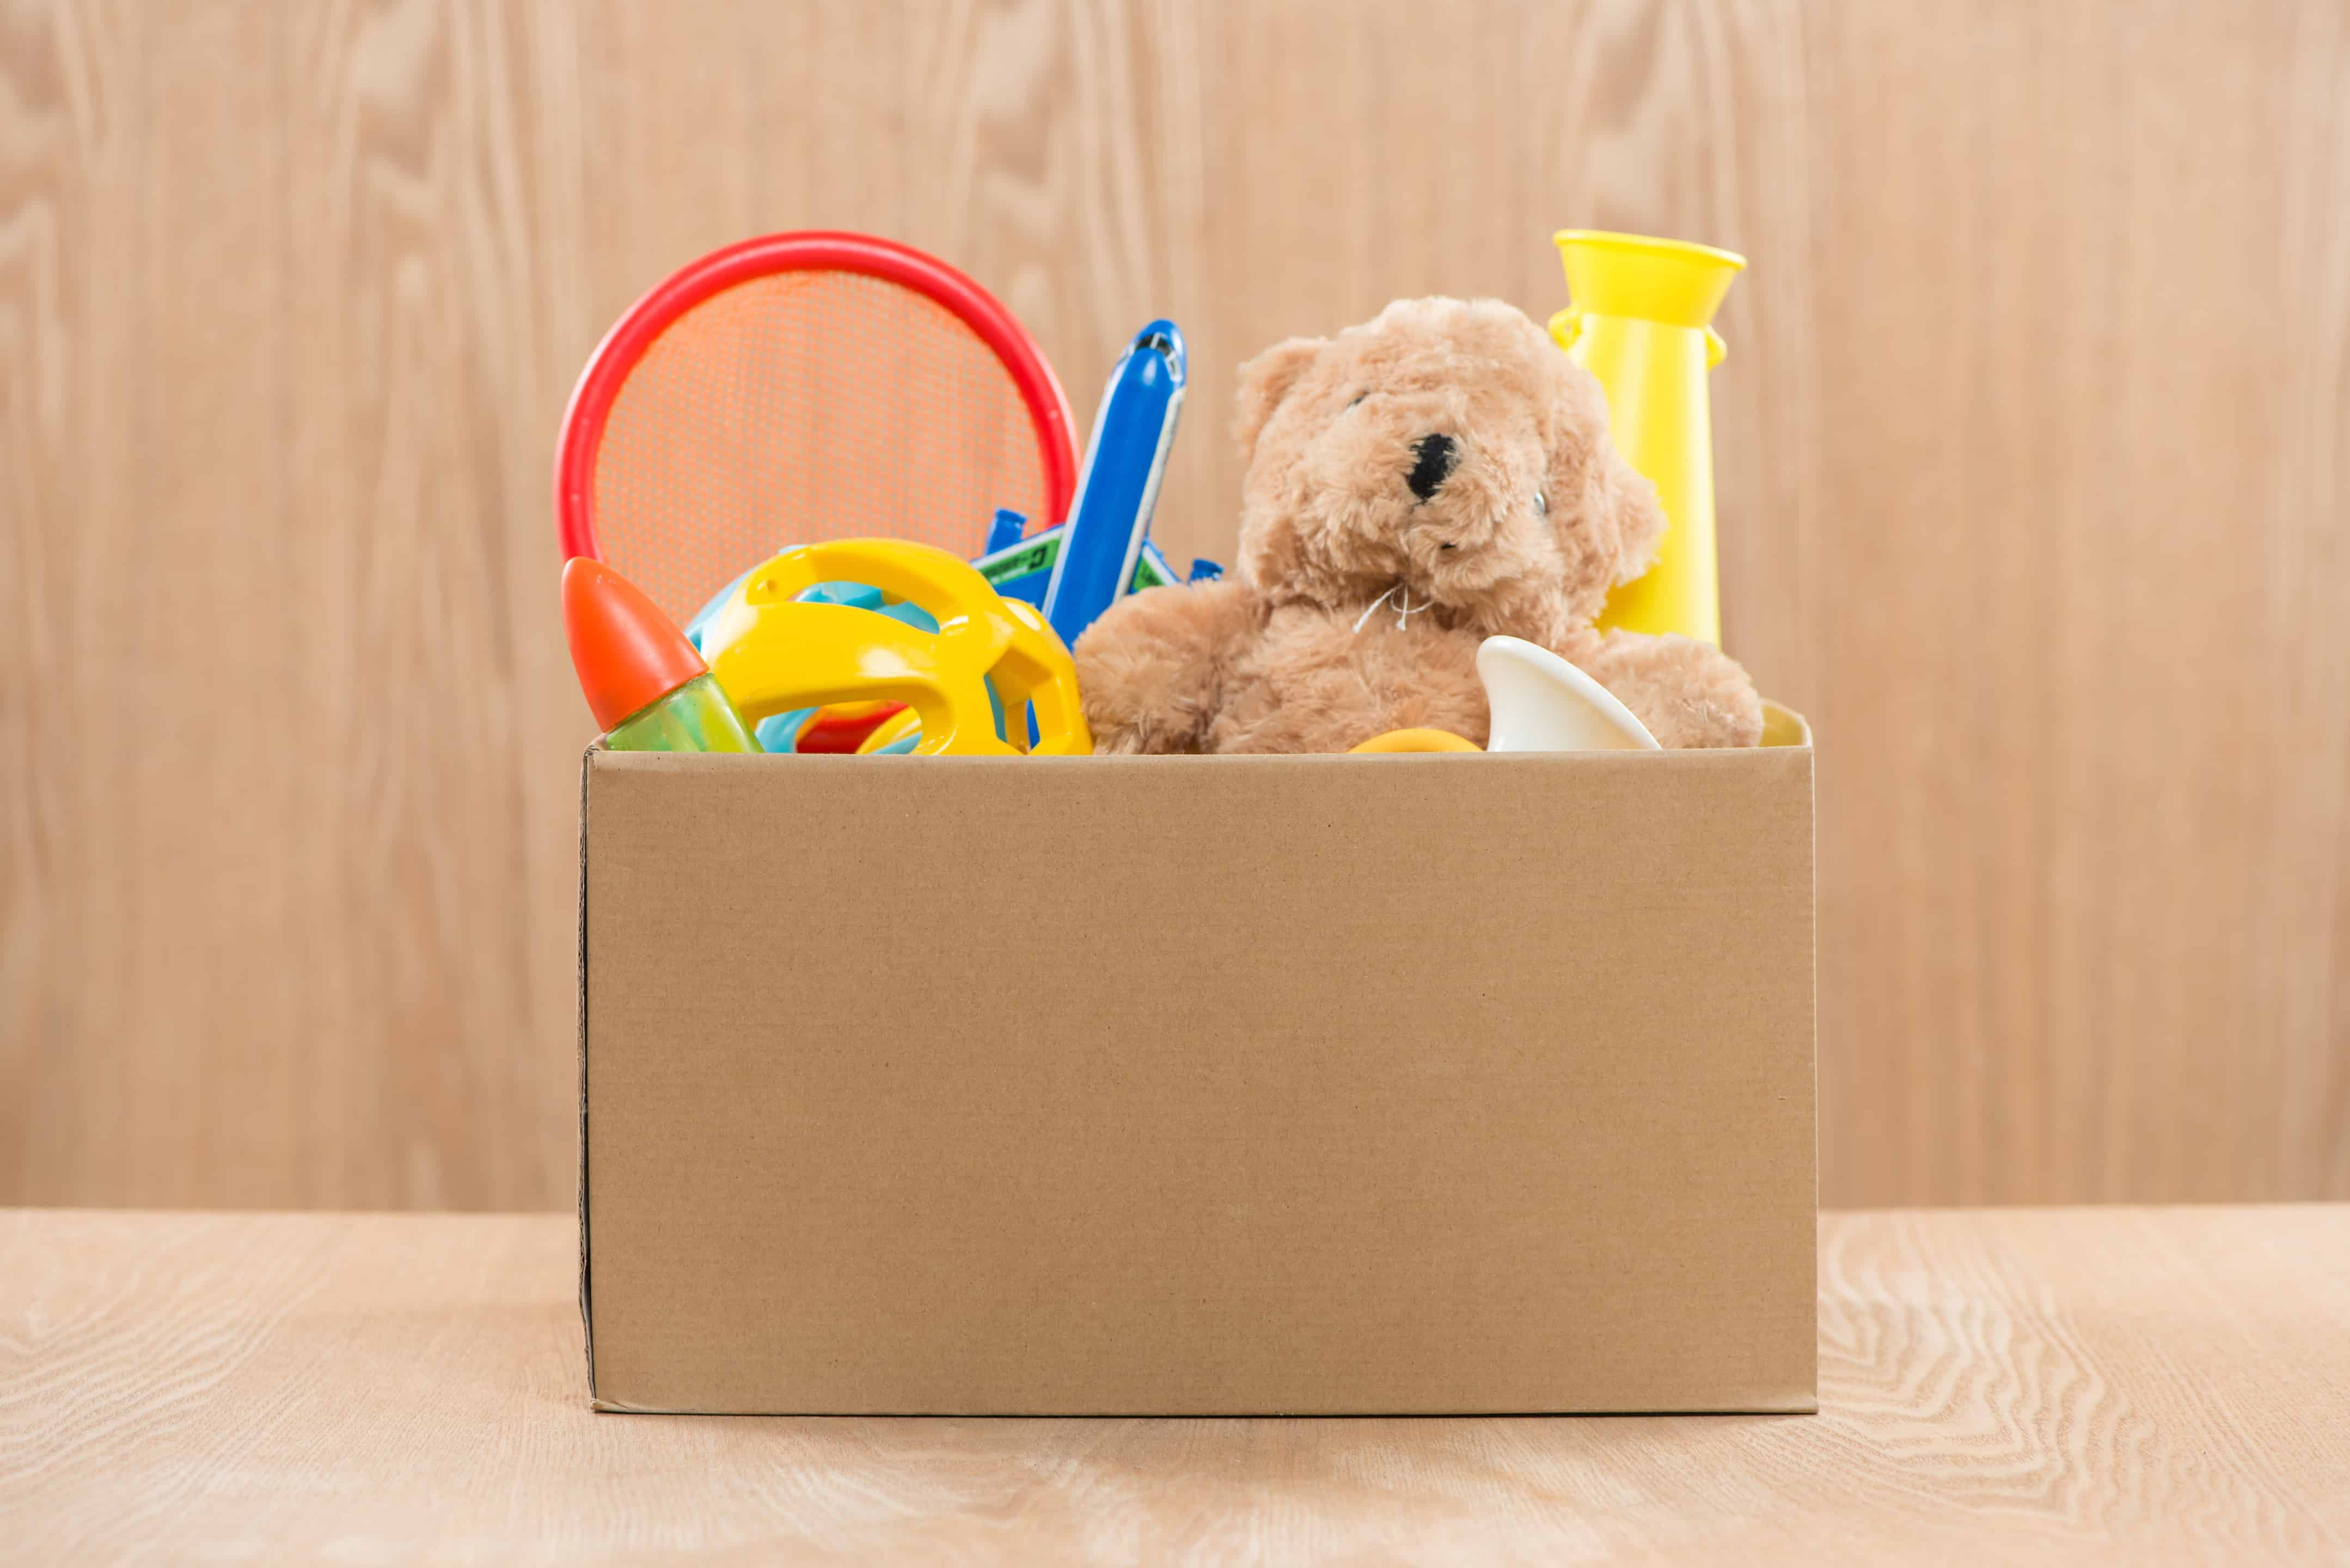 How To Cash In Unwanted Stuff - box filled with unwanted toys and other items - Mayflower